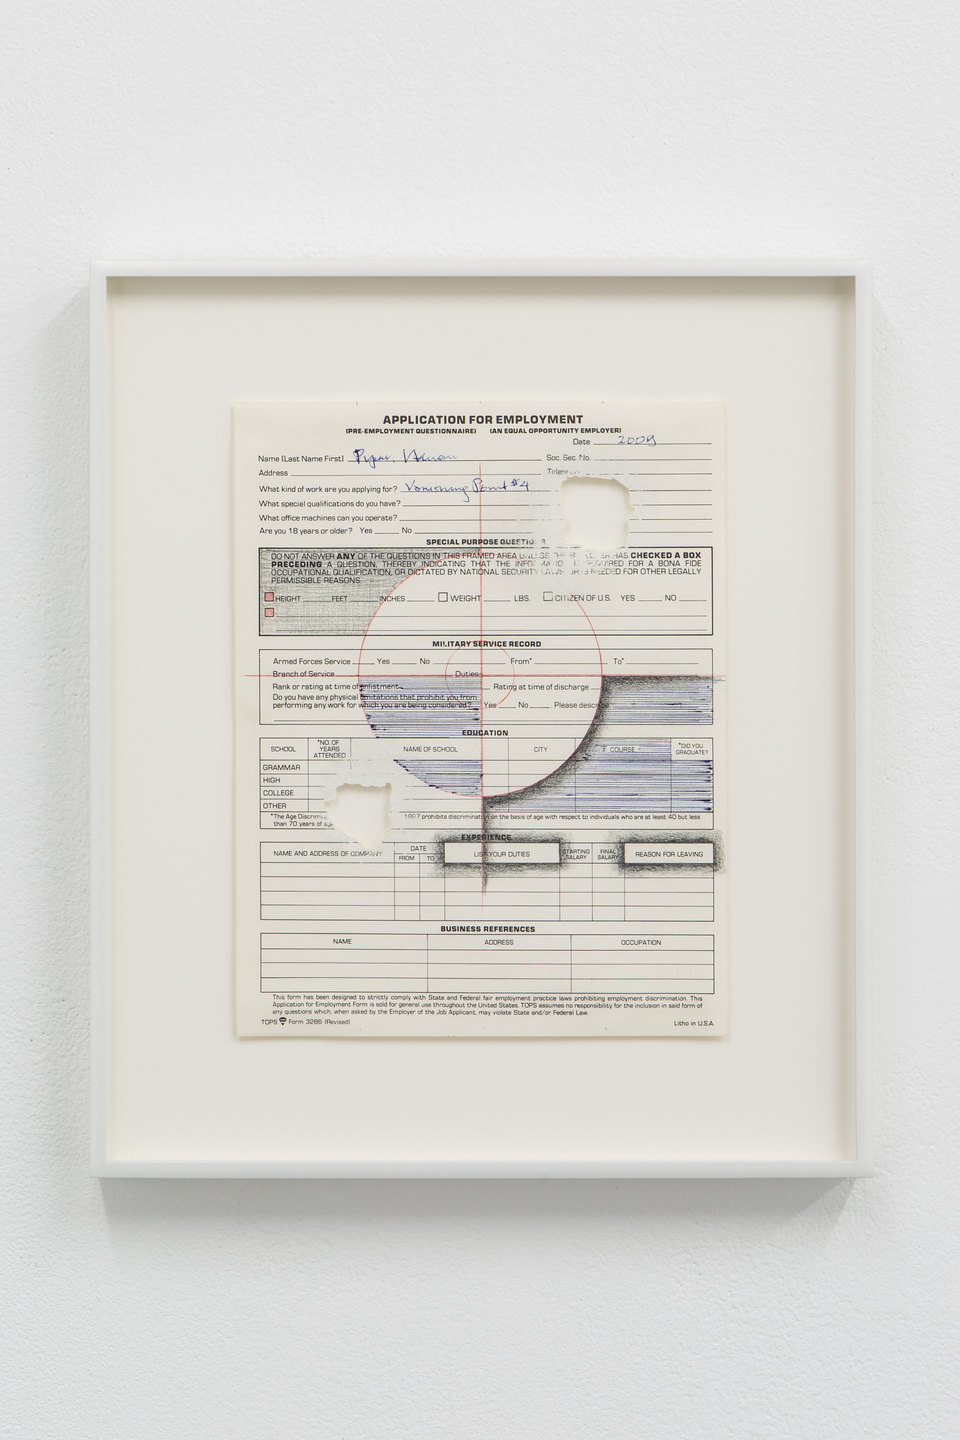 Adrian Piper, 'Vanishing Point #4', 2009, Black and red graphite pencil, blue graphite pencil on application for employment form, sanded with sandpaper, 27.9 x 21.6cm, Civic Duty, 2019, Cell Project Space